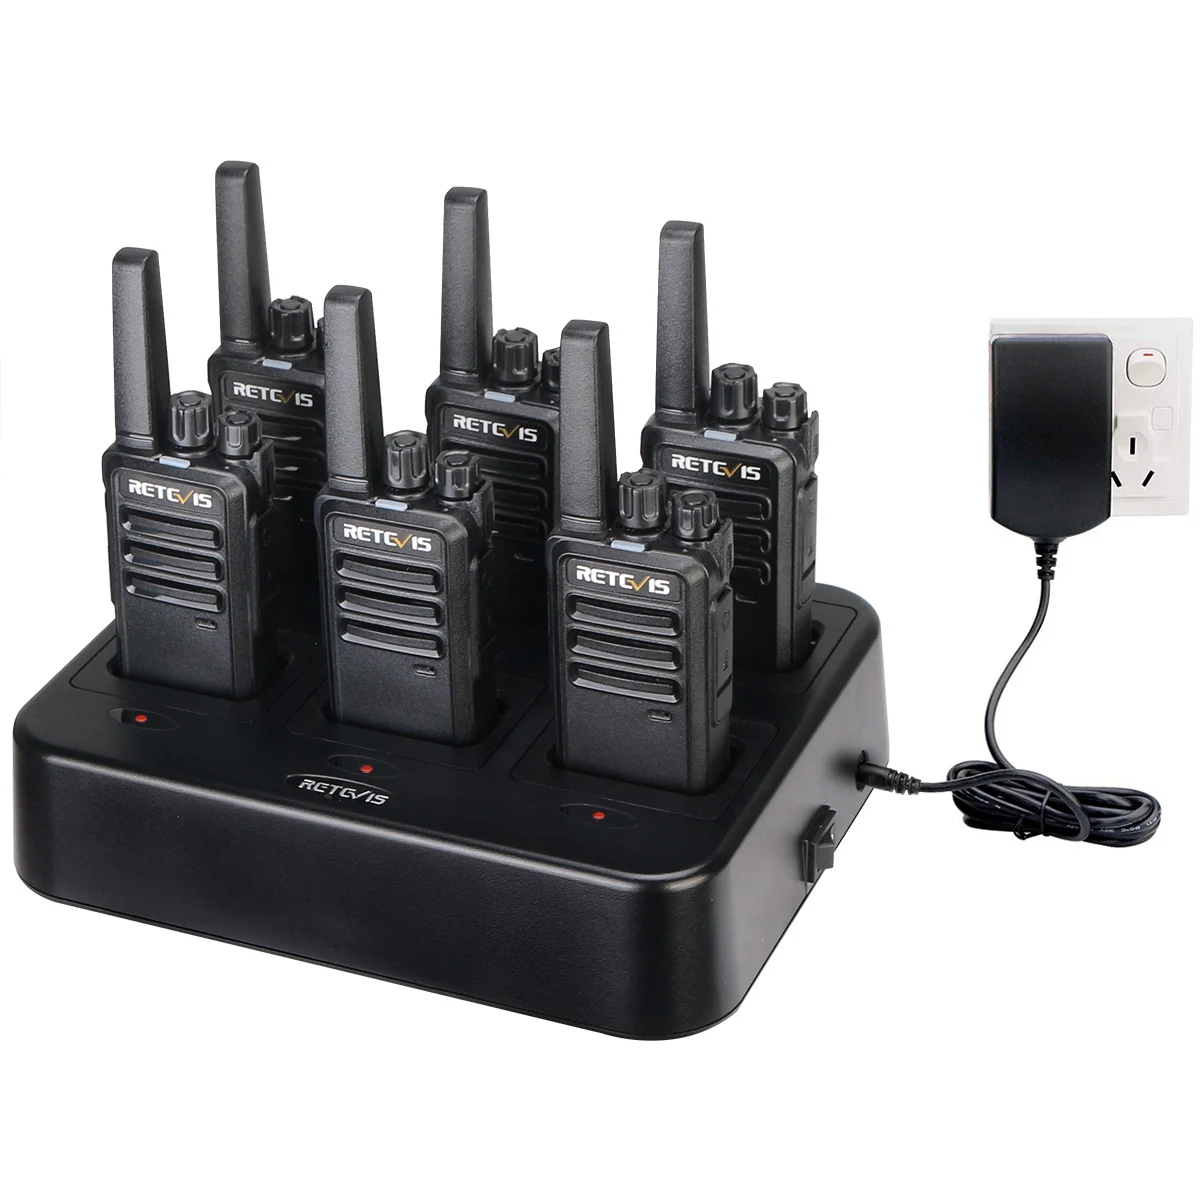 

6pack long range radio set with muti rapid charger Retevis RT668 0.5W PMR446 walkie talkie with muti GANG dock charger long hand